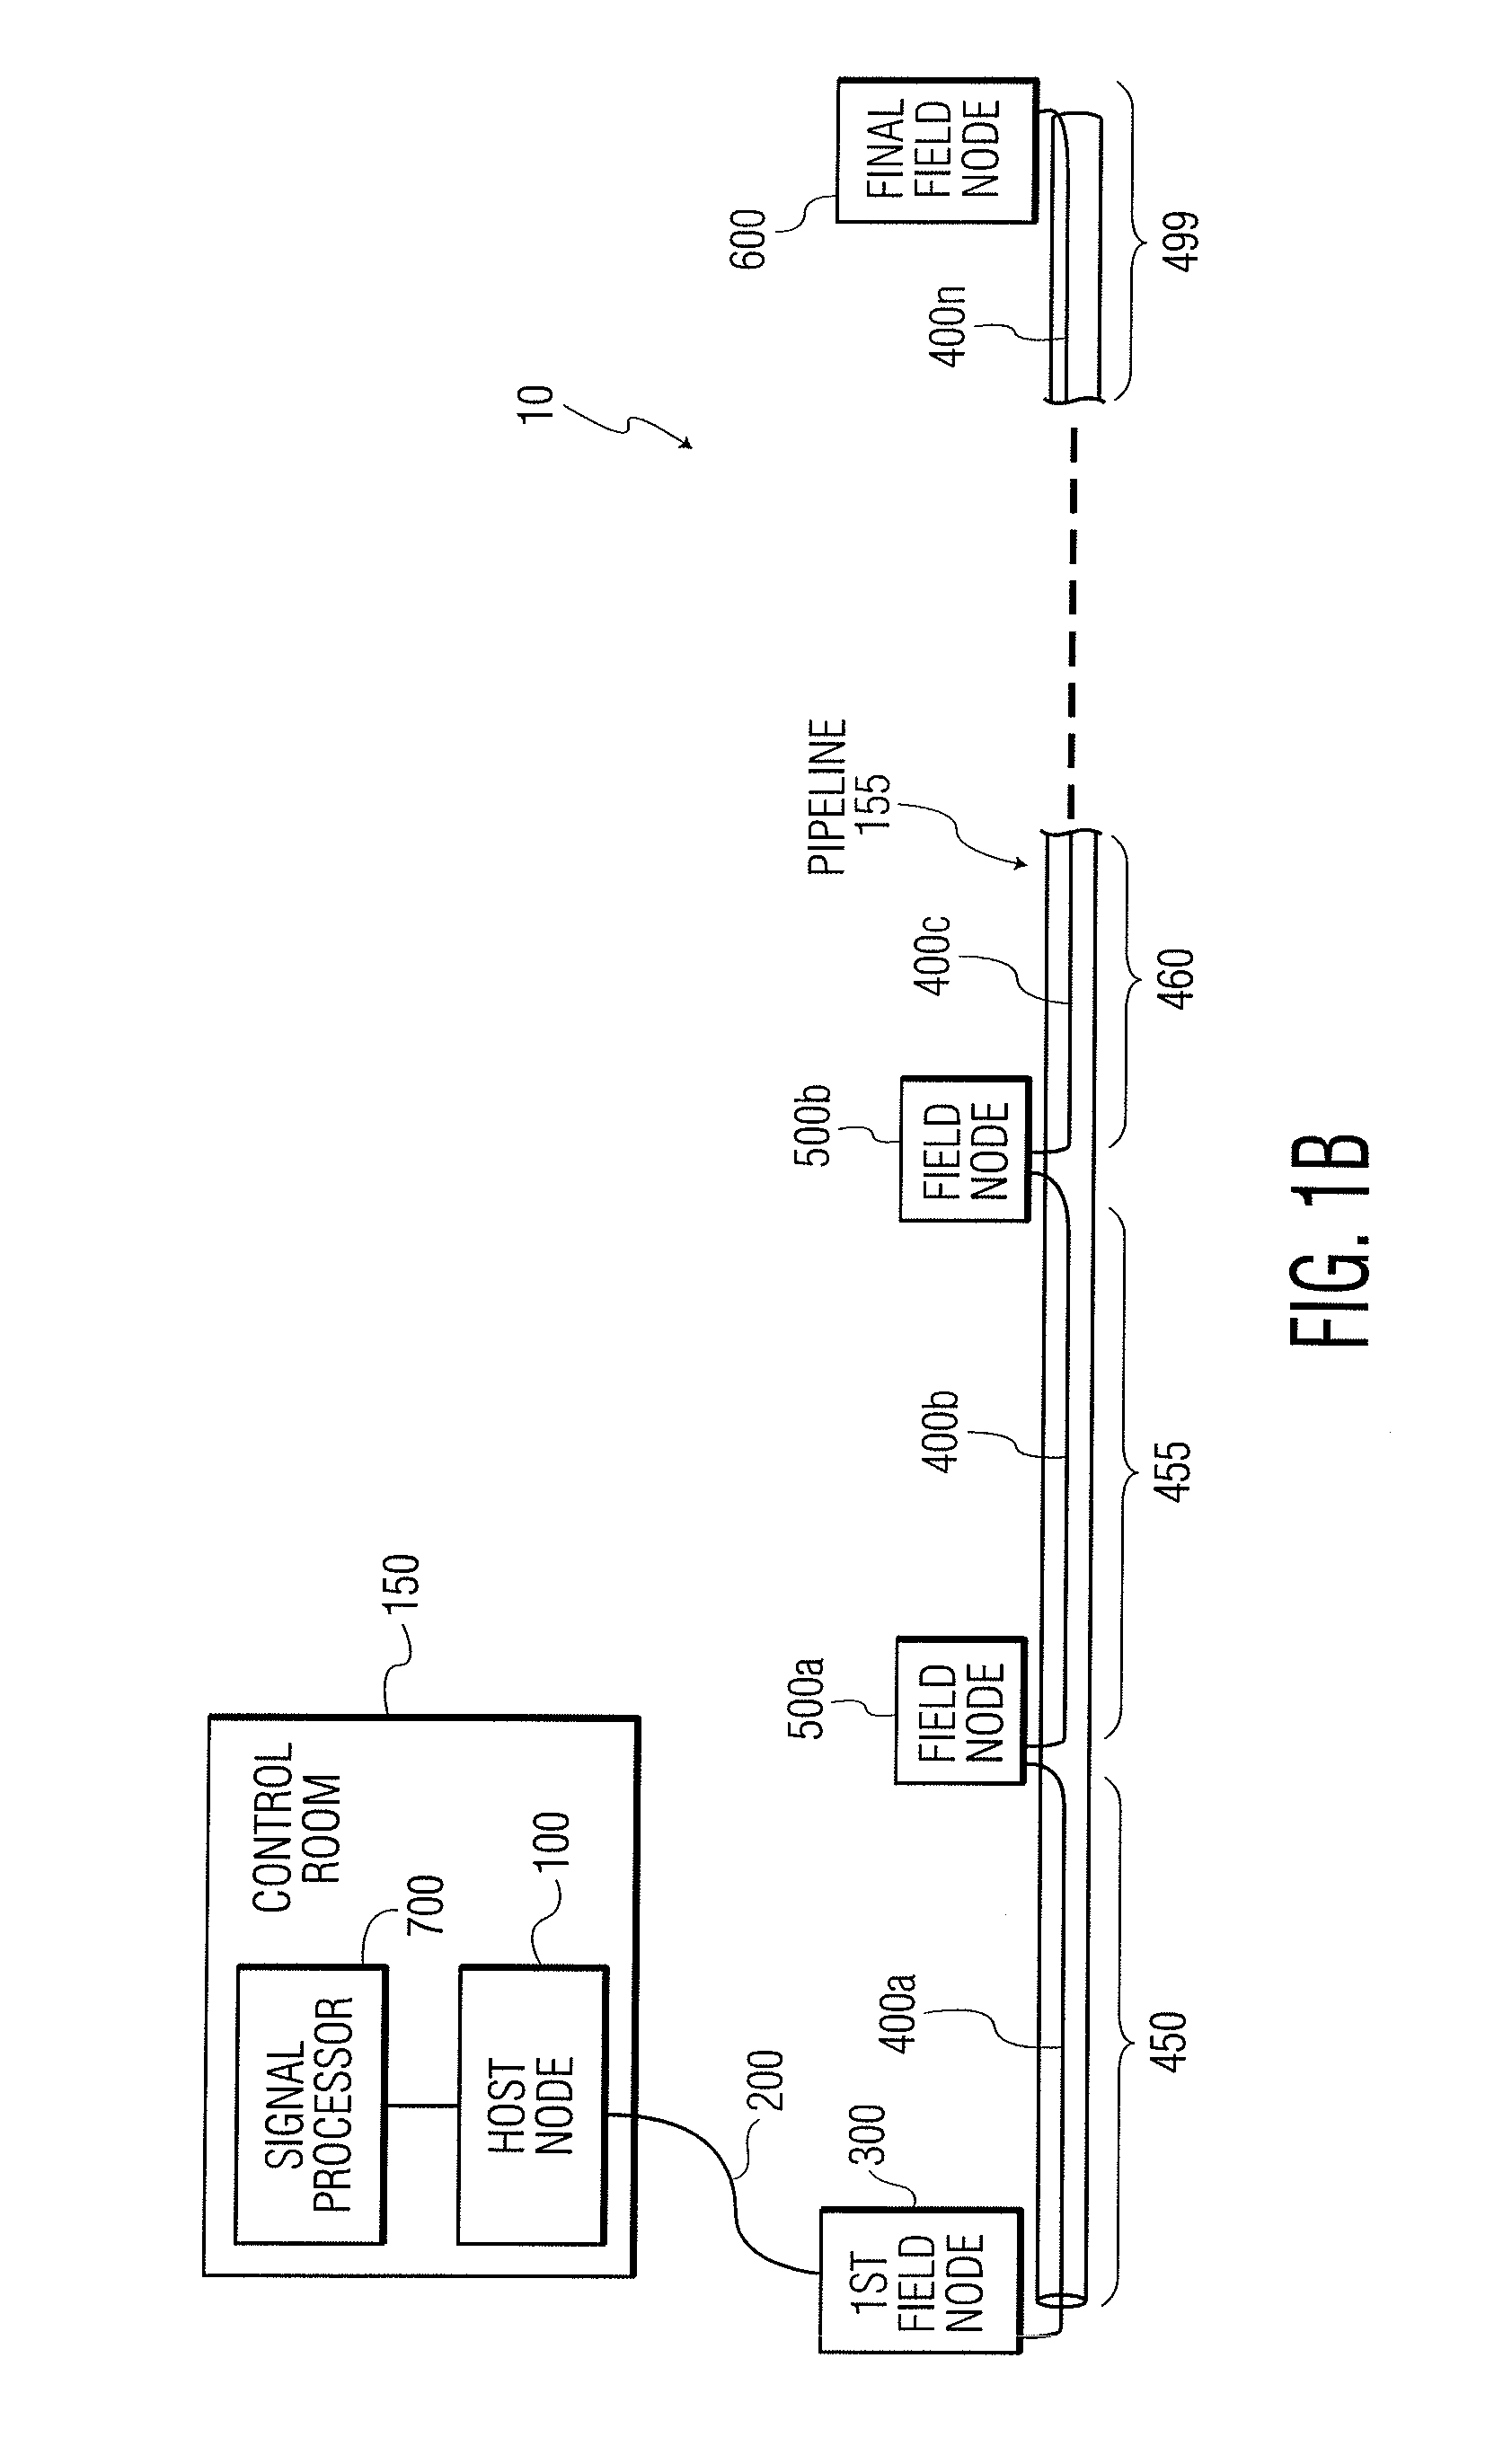 Optical detection systems and methods of using the same